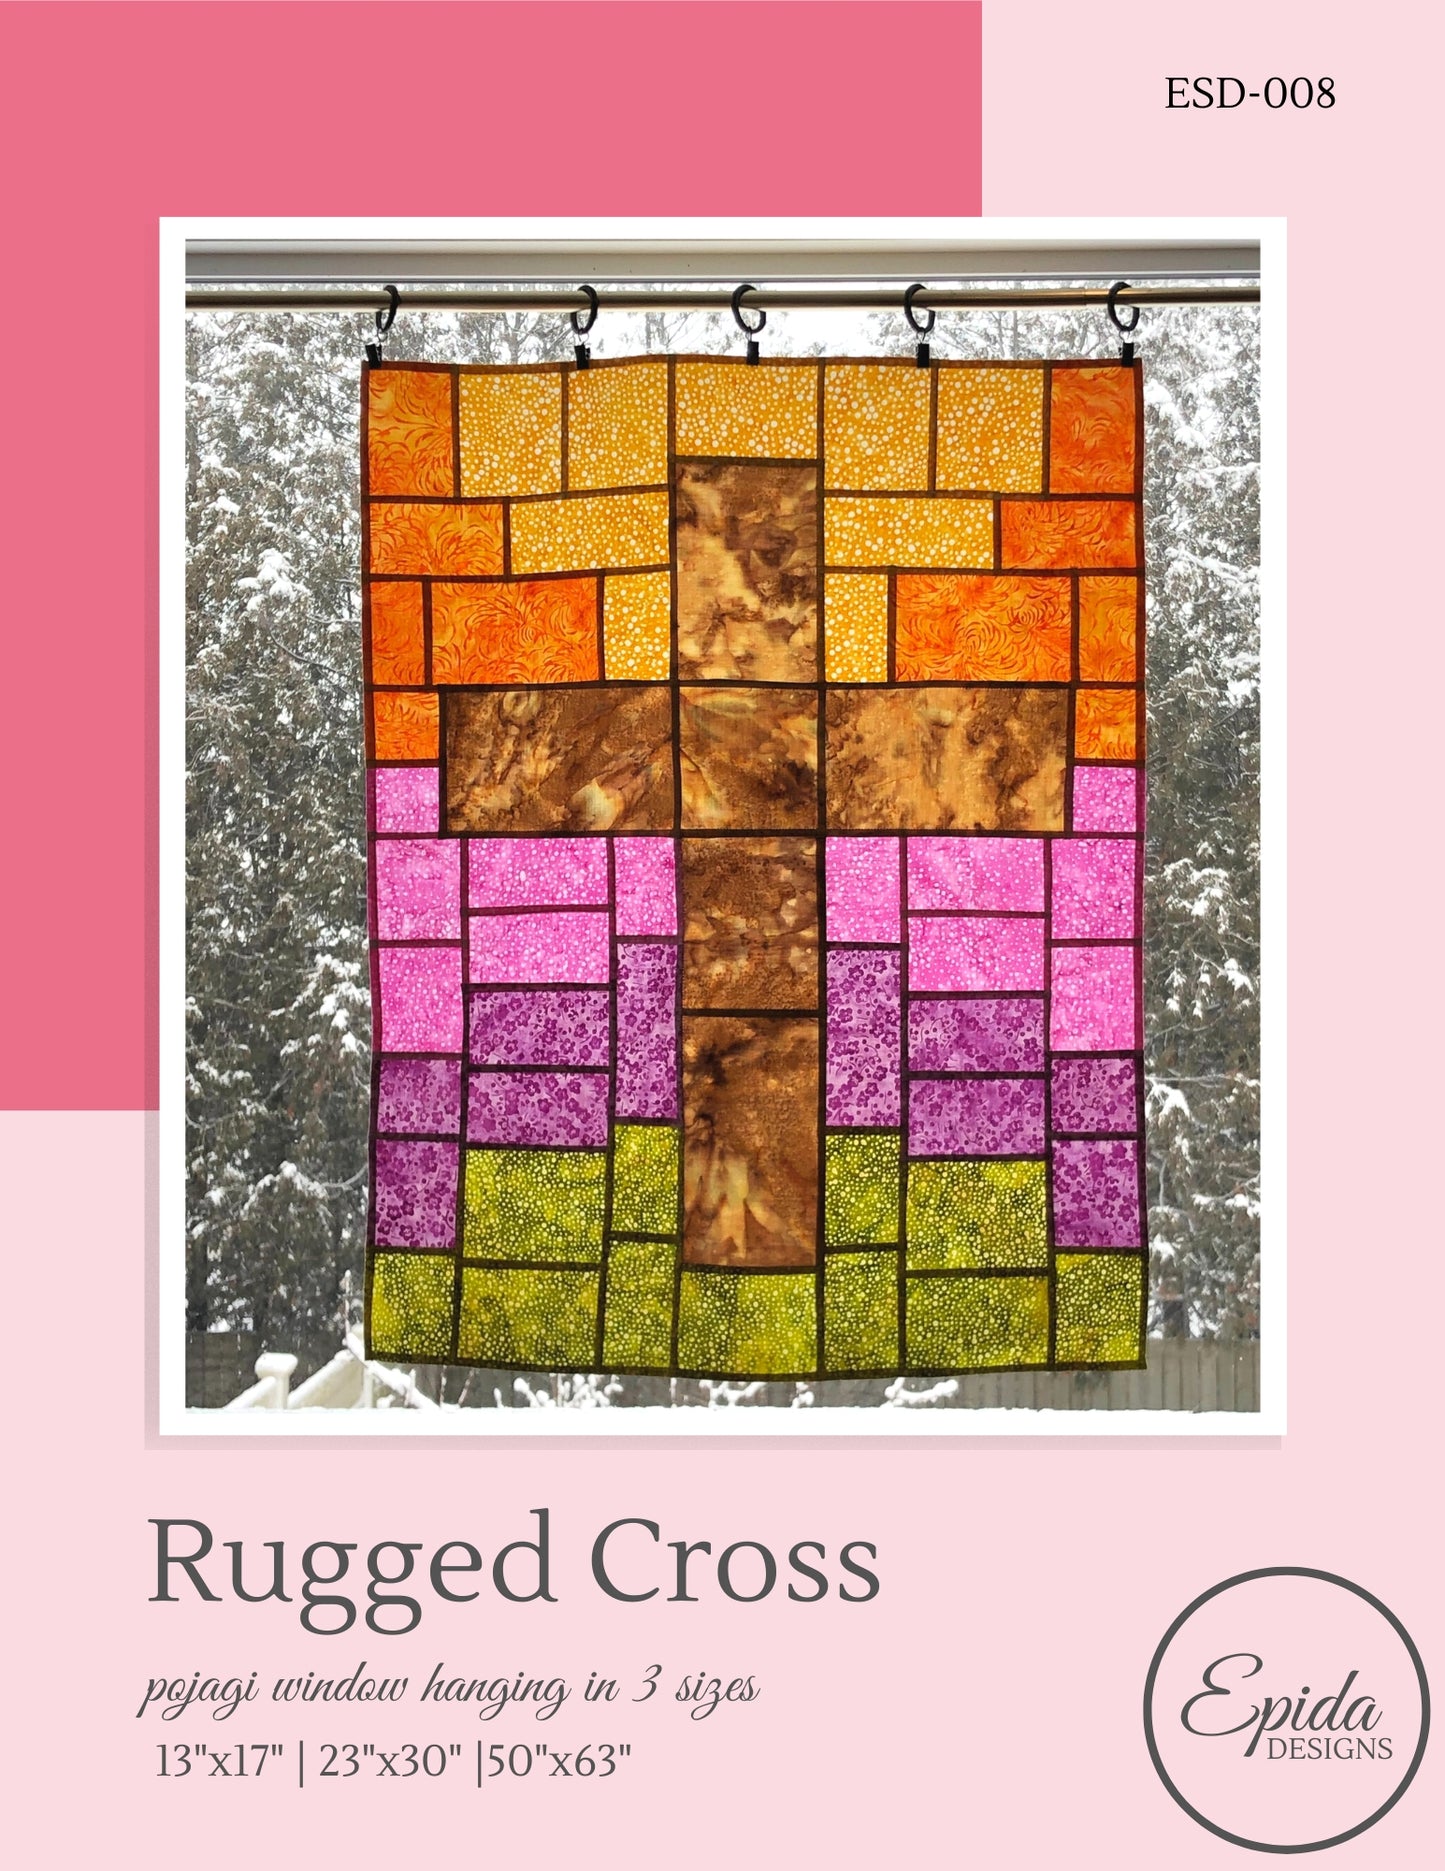 rugged cross stained glass window hanging pattern cover.